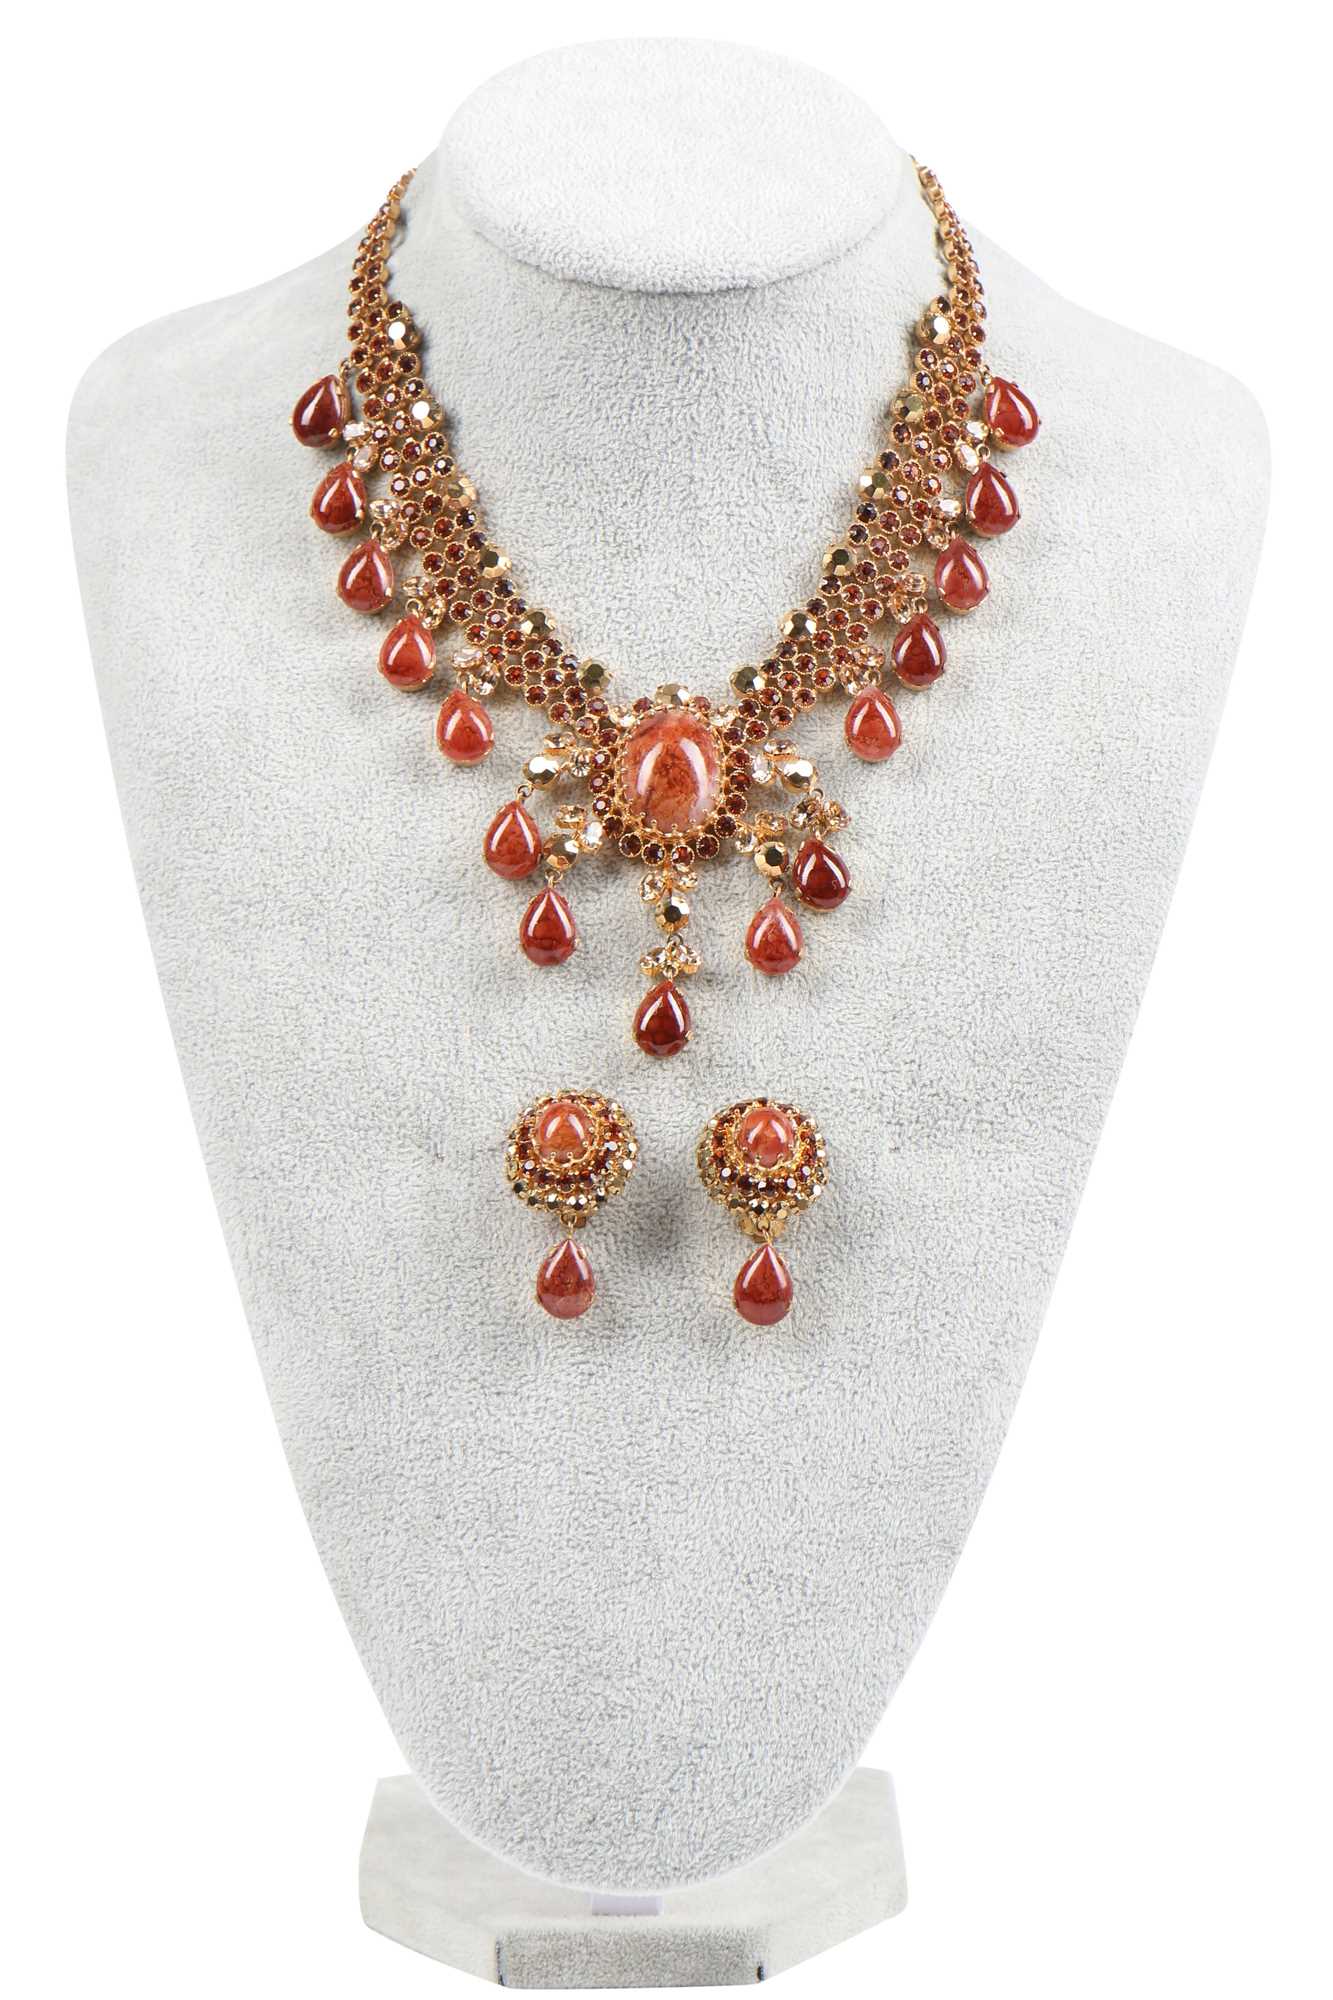 Lot 37 - A demi-parure of rhinestones and droplet cabochon 'stones', probably by Dior, 1950s